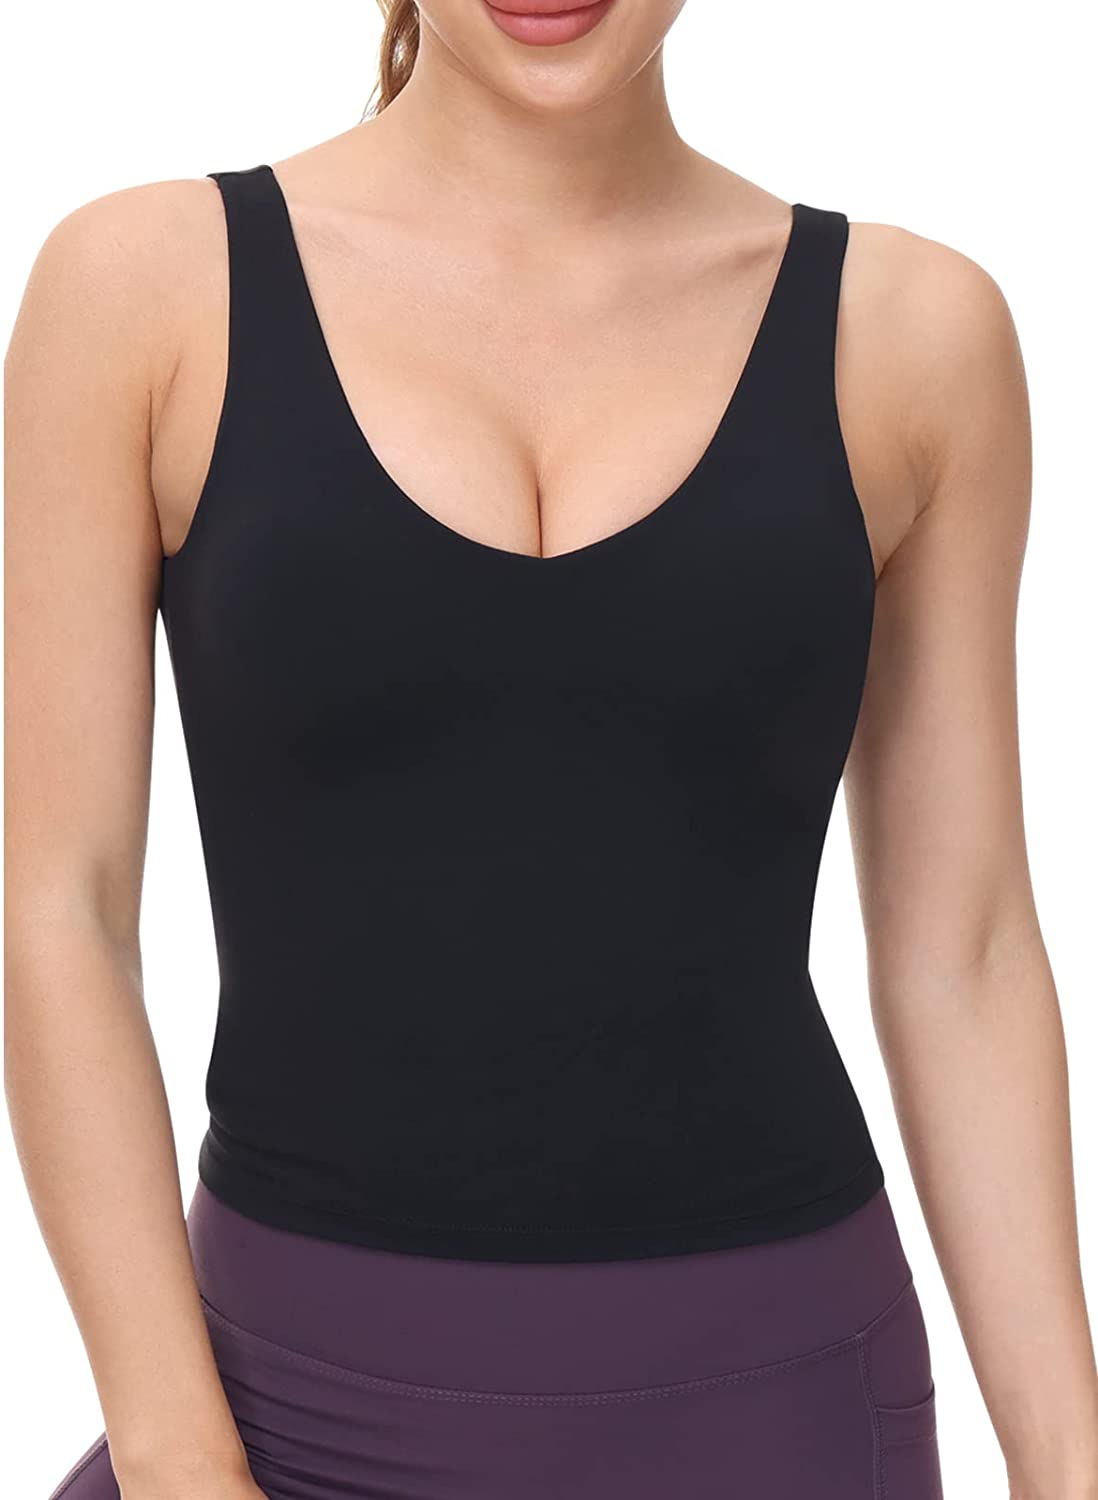 Workout Tops for Women Yoga Tank Tops with Built in Bra Wirefree